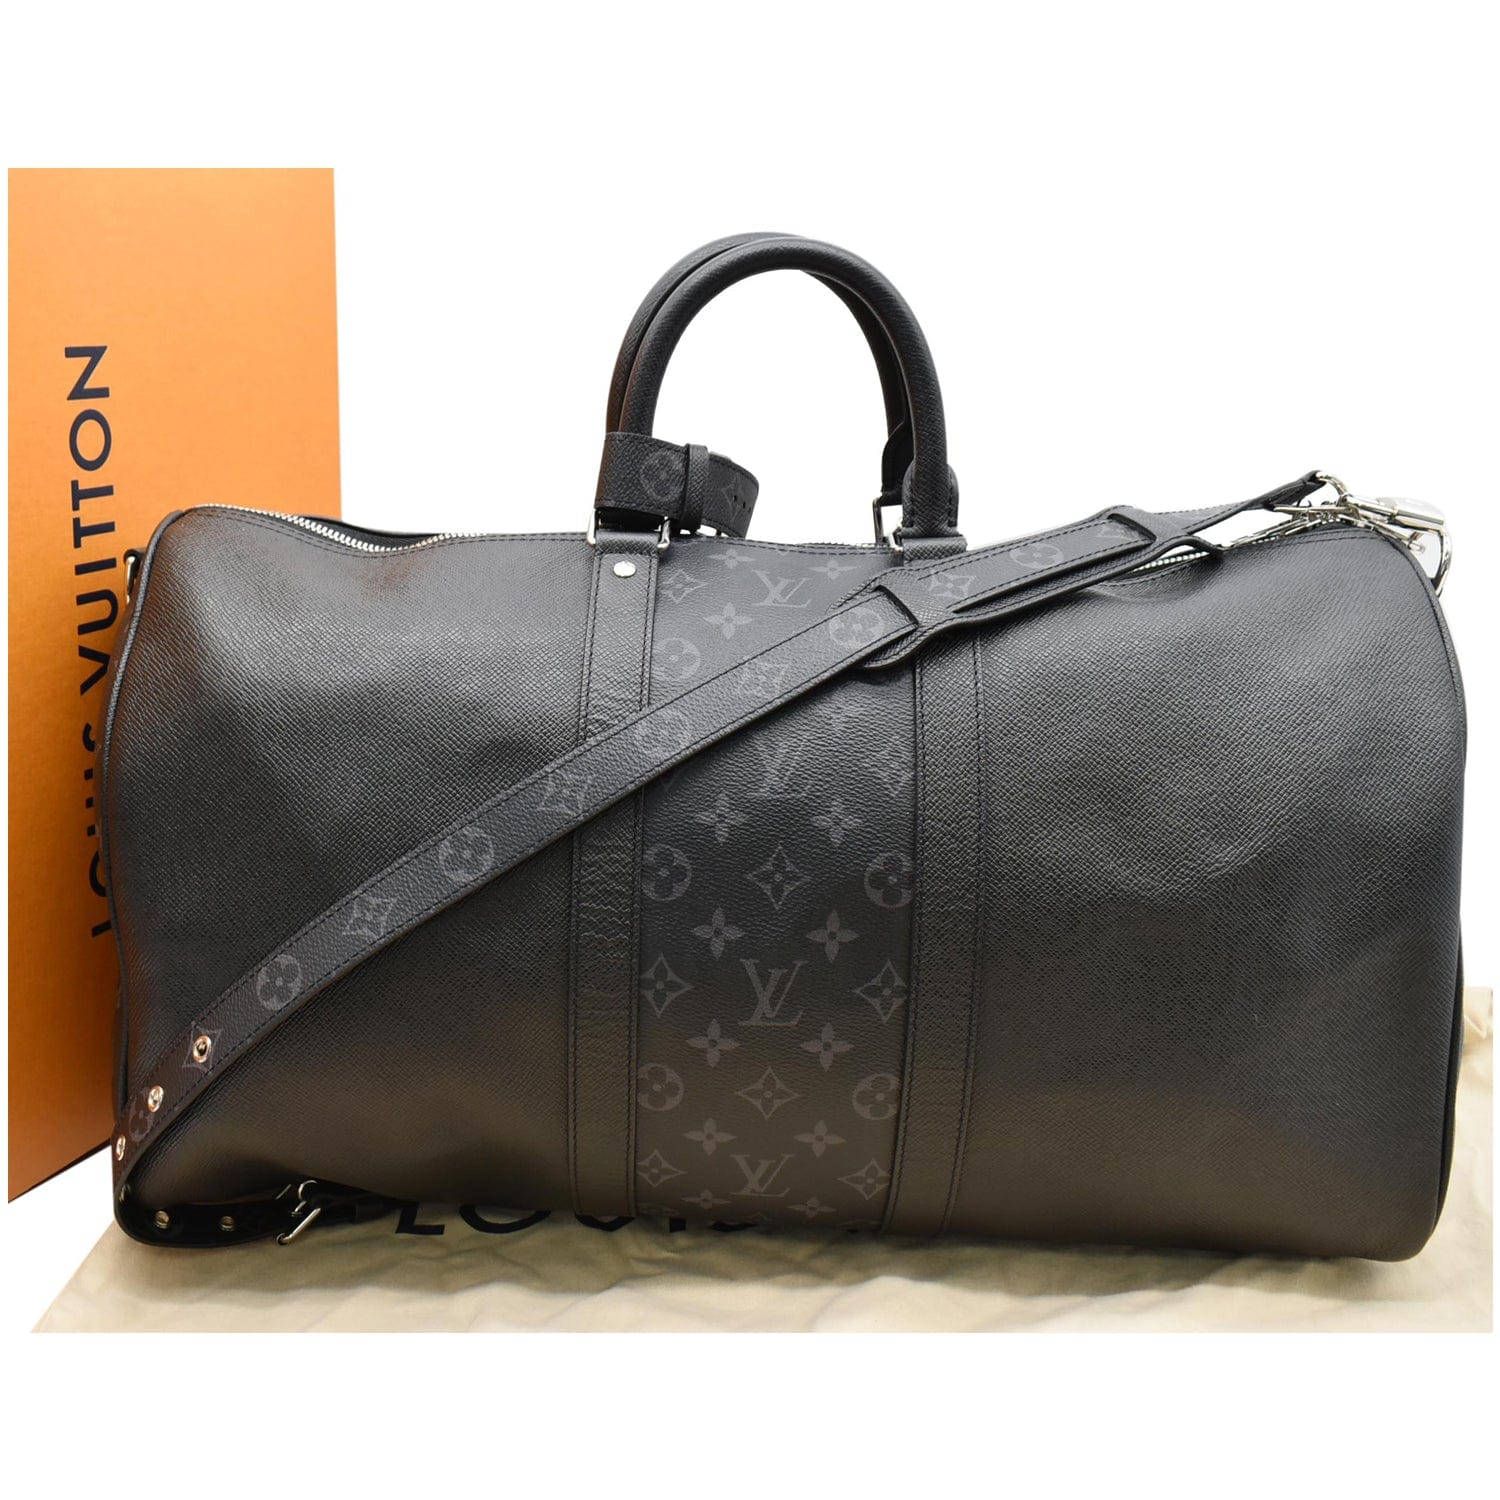 Louis Vuitton Keepall 50 Travel bag in black épi leather at